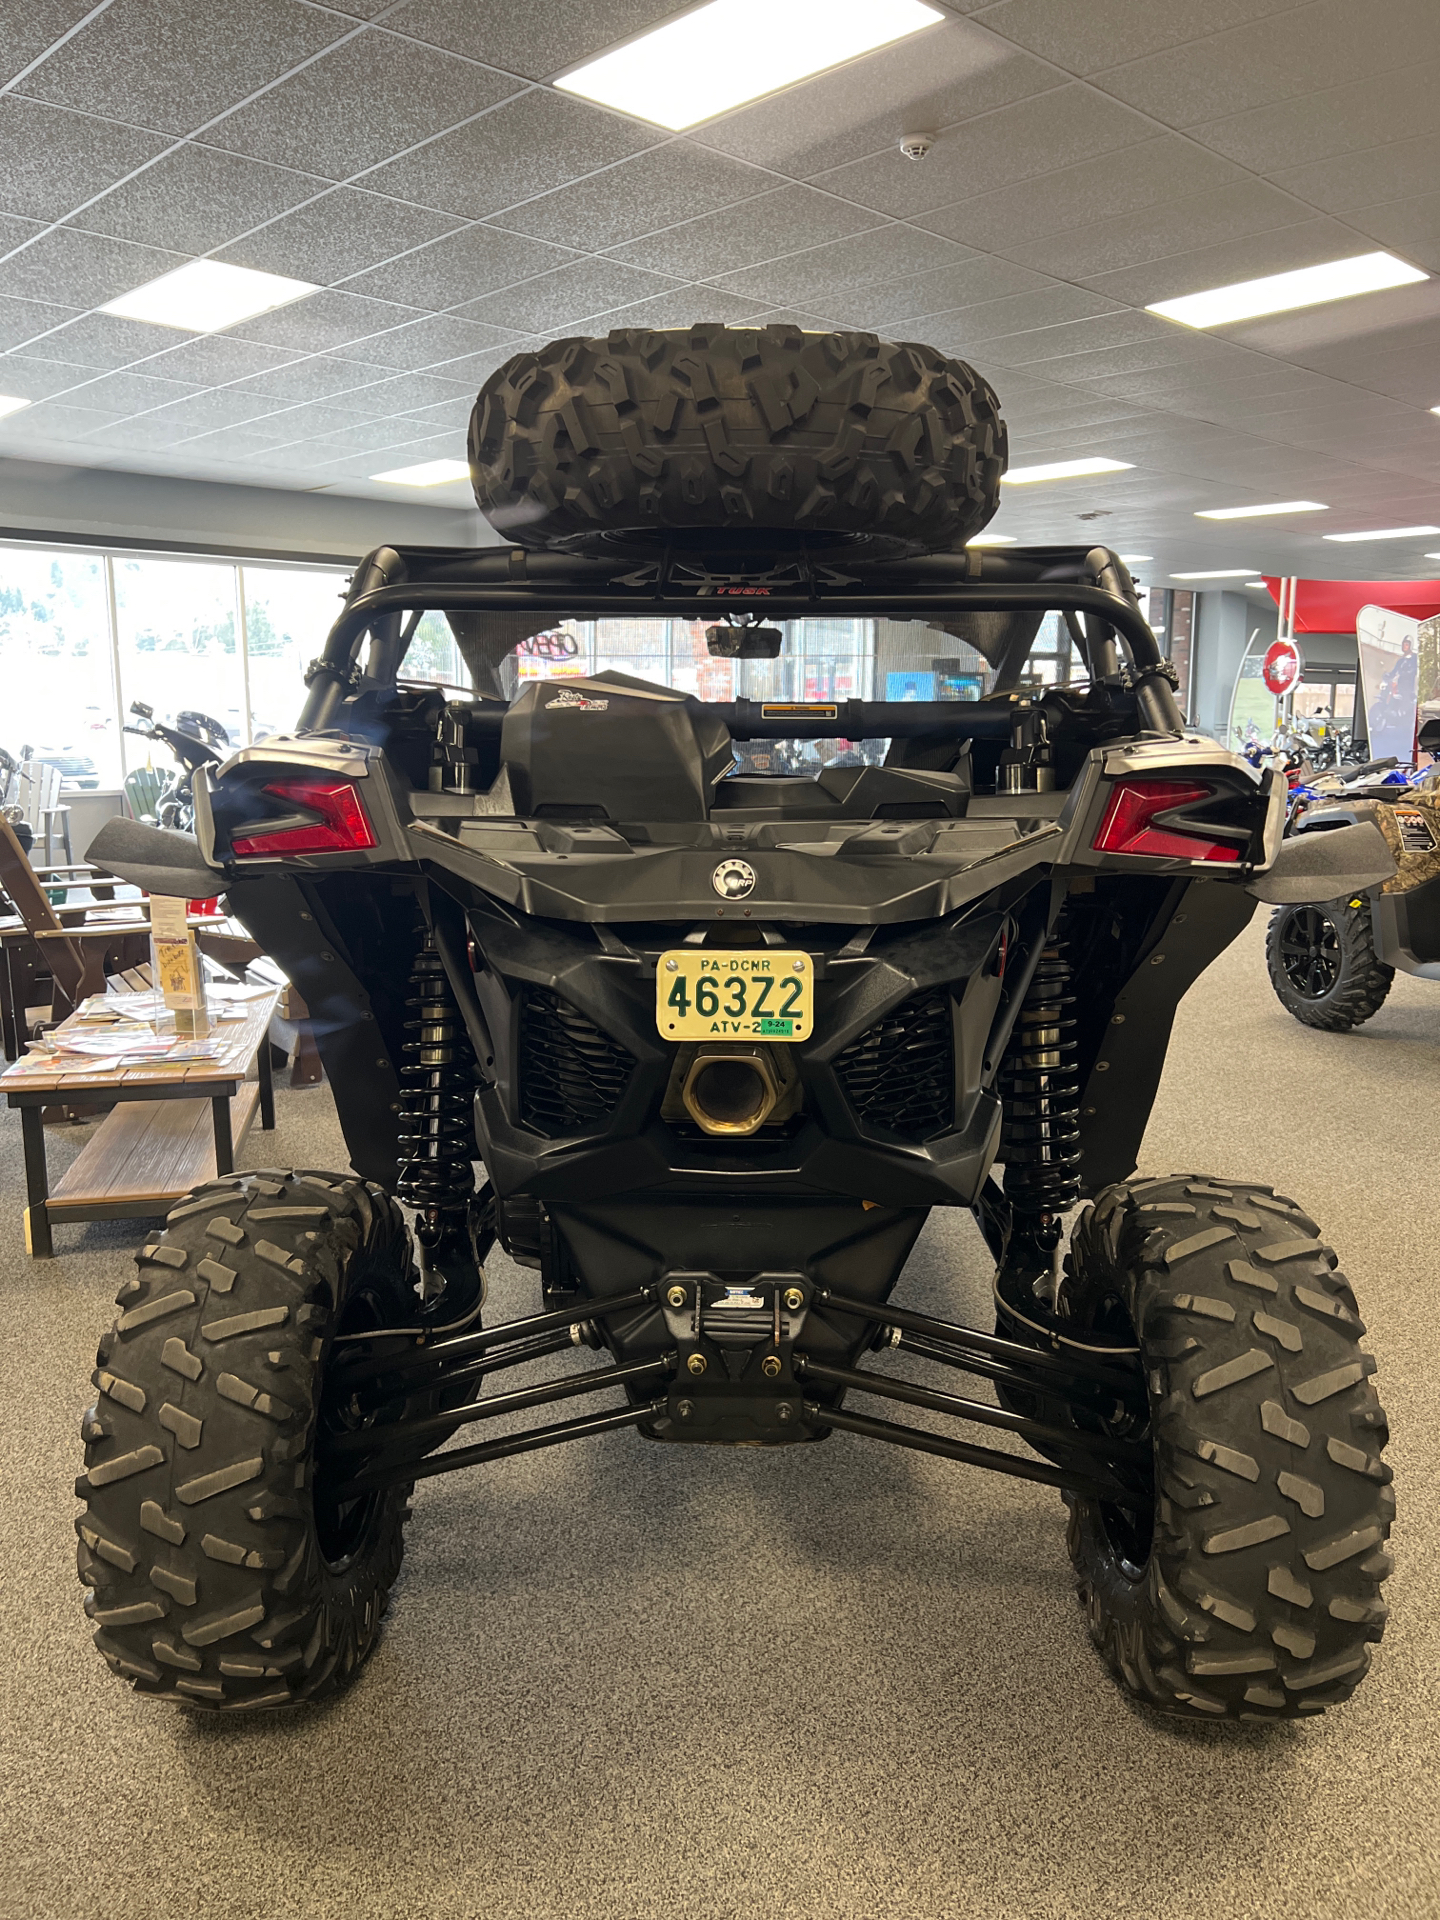 2019 Can-Am Maverick X3 X ds Turbo R in Honesdale, Pennsylvania - Photo 4